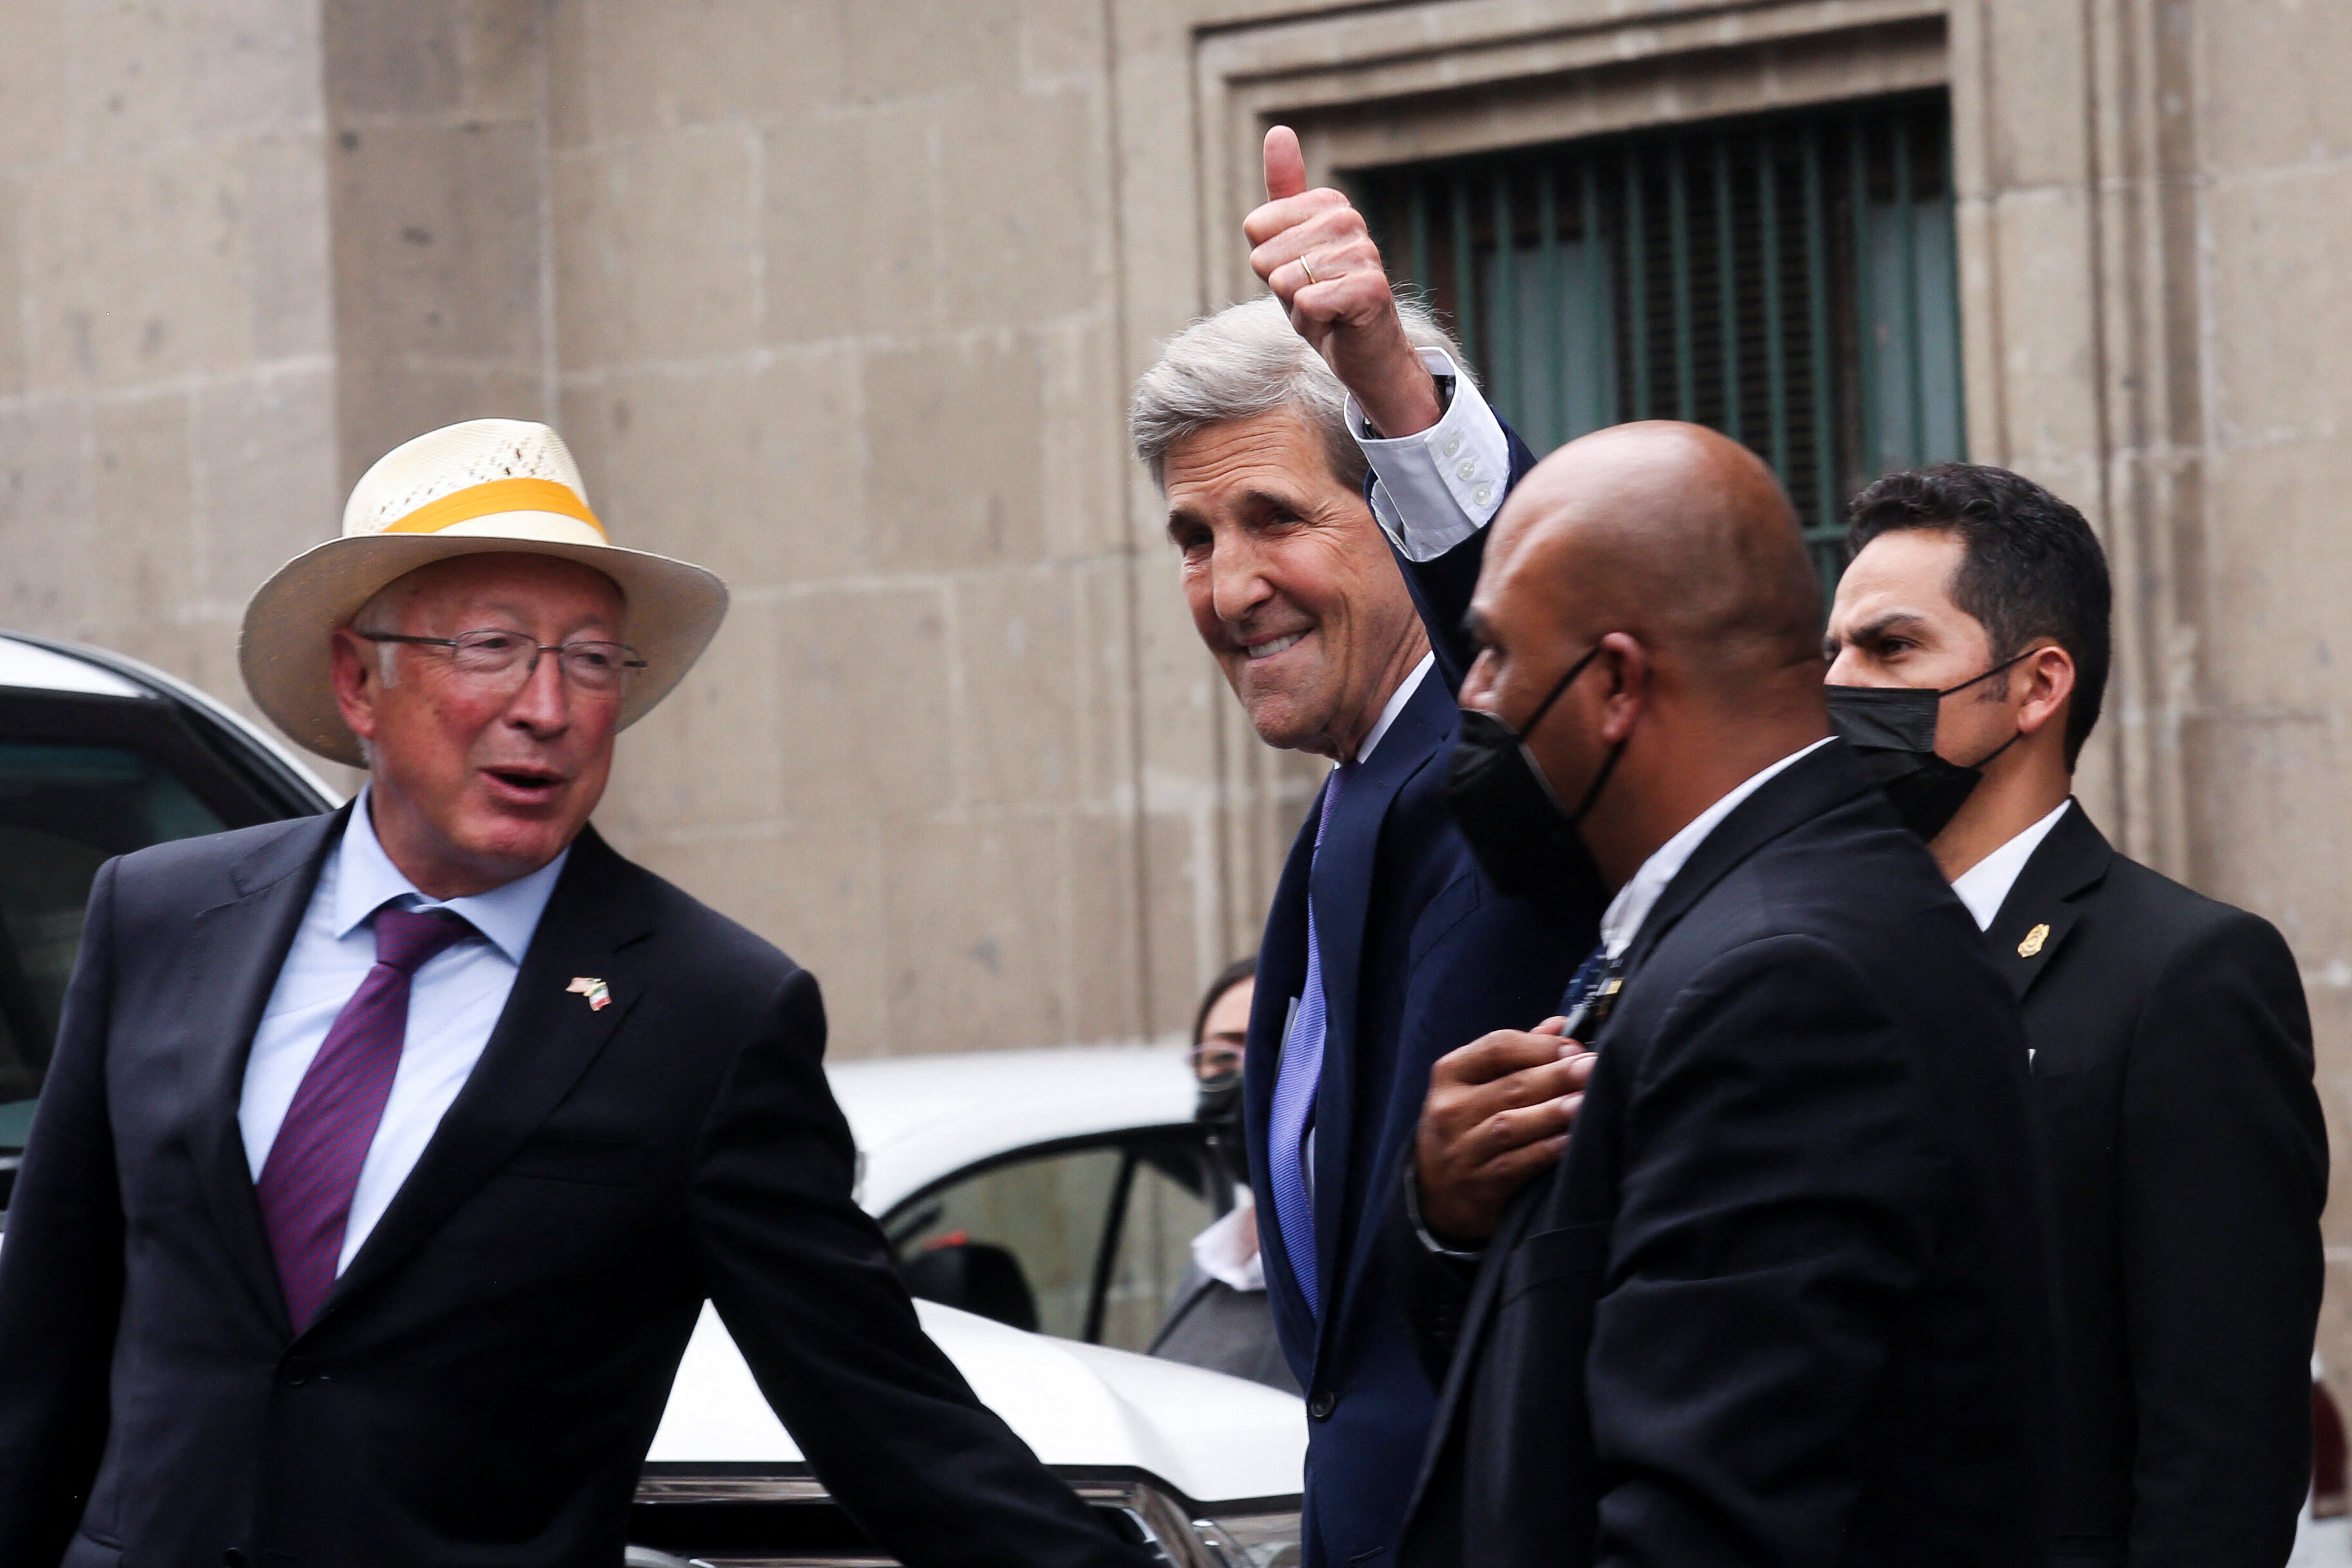 John Kerry indicated that he has worked in recent weeks with Ken Salazar to bring together key companies and listen to their concerns about the transition to a clean economy (Photo: Reuters/Quetzale Nikte-Ha)